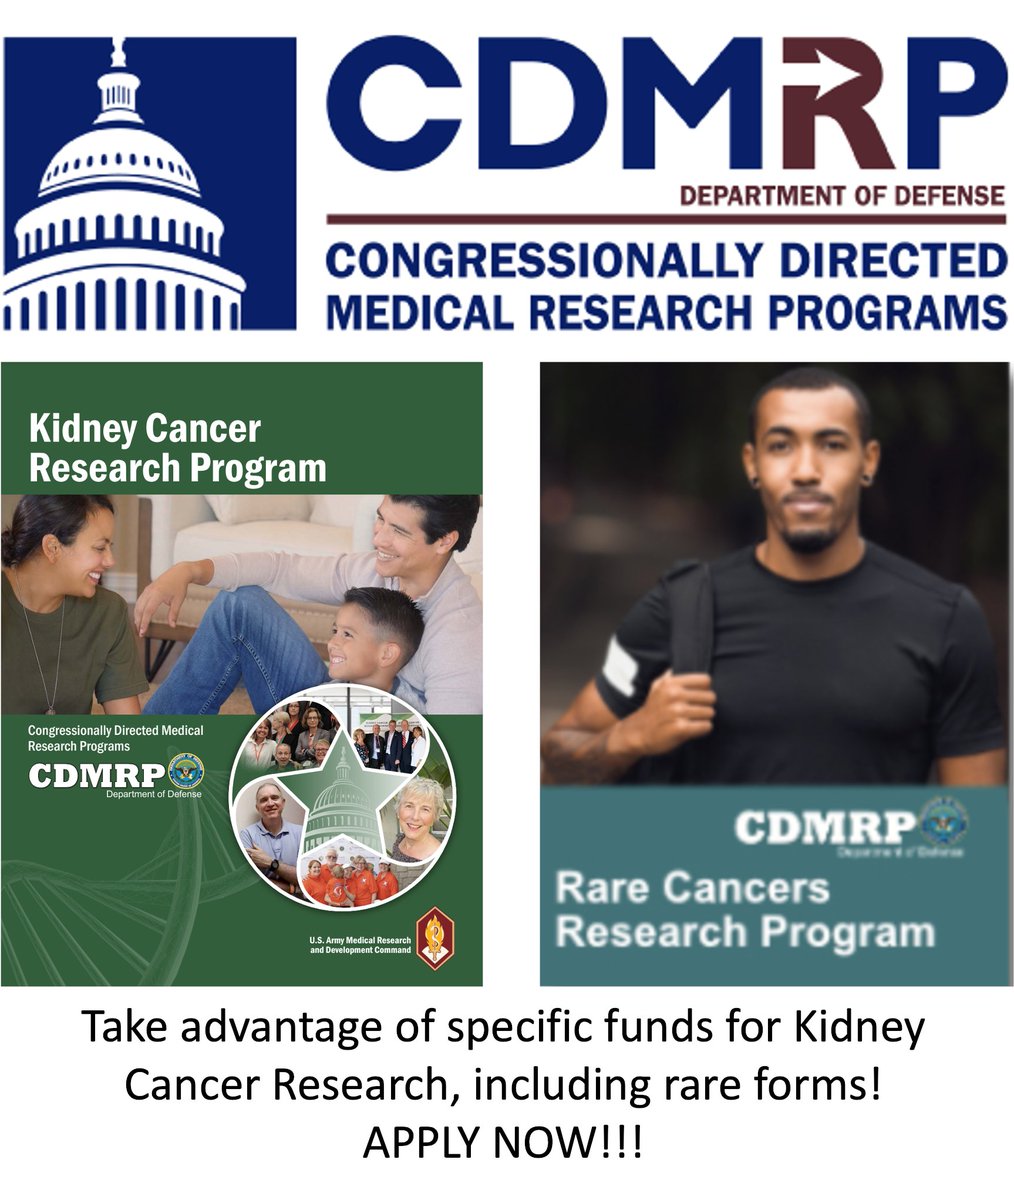 You can now apply for #kidneycancer research funding at TWO @CDMRP programs:

#KCRP 👉 cdmrp.health.mil/funding/kcrp
#RCRP 👉cdmrp.health.mil/funding/rcrp

Kidney Cancer Research Program - $50 M
Rare Cancers Research Program - $17.5 M

Take advantage of both! #unstoppabletogether